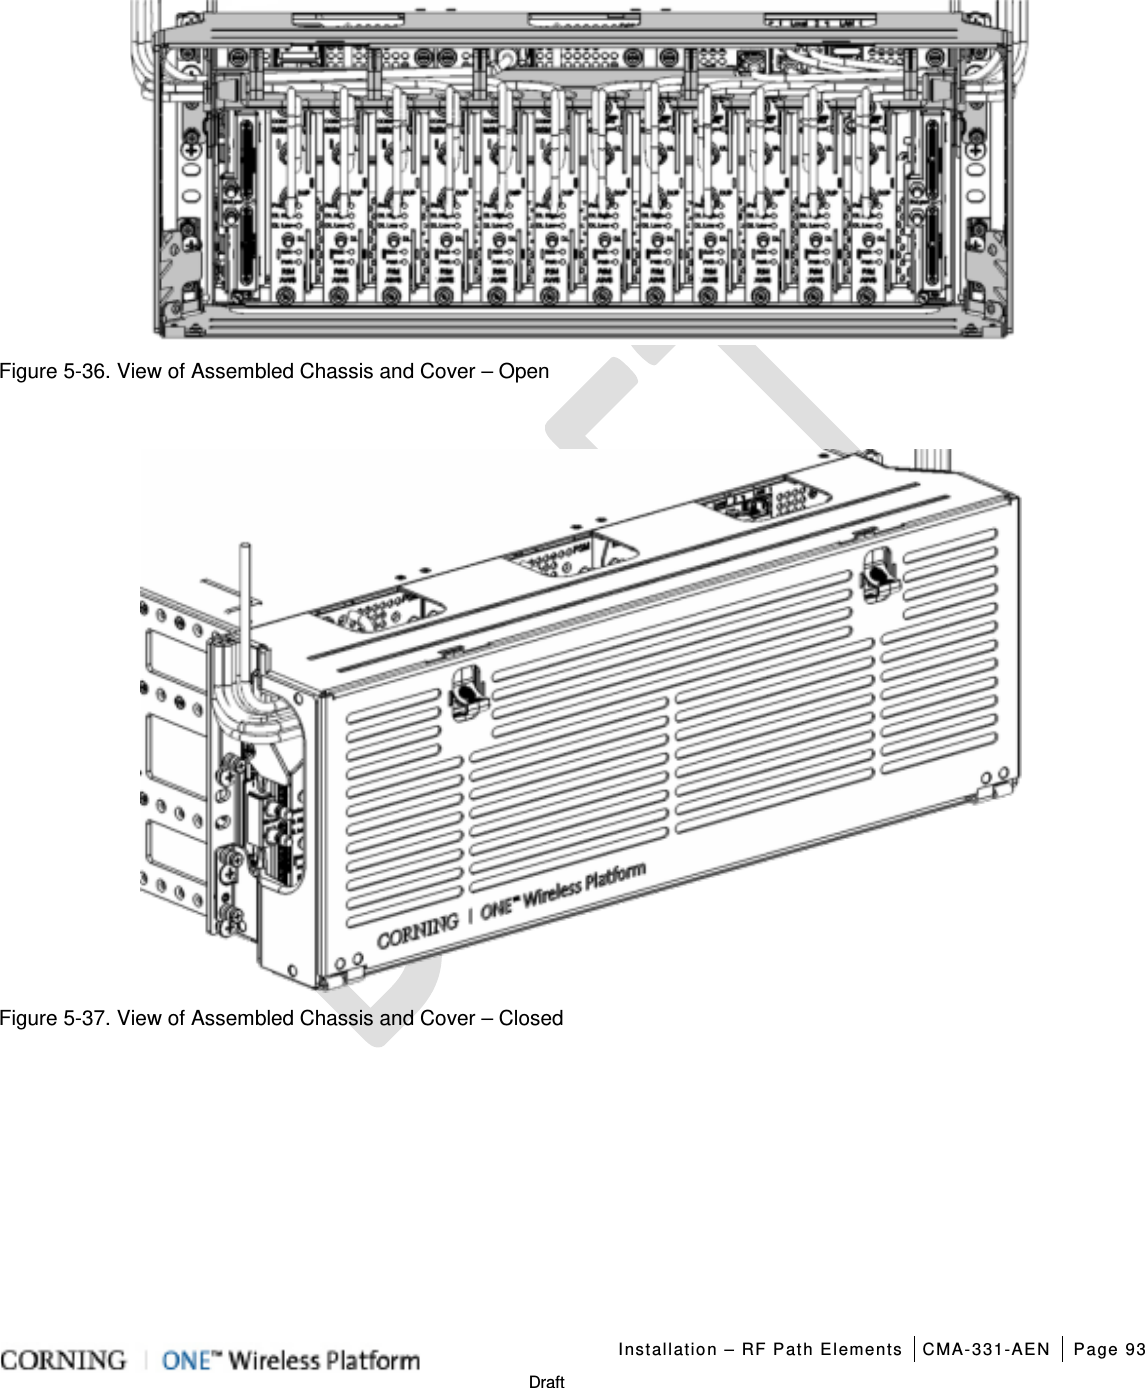   Installation – RF Path Elements CMA-331-AEN Page 93   Draft   Figure  5-36. View of Assembled Chassis and Cover – Open   Figure  5-37. View of Assembled Chassis and Cover – Closed    